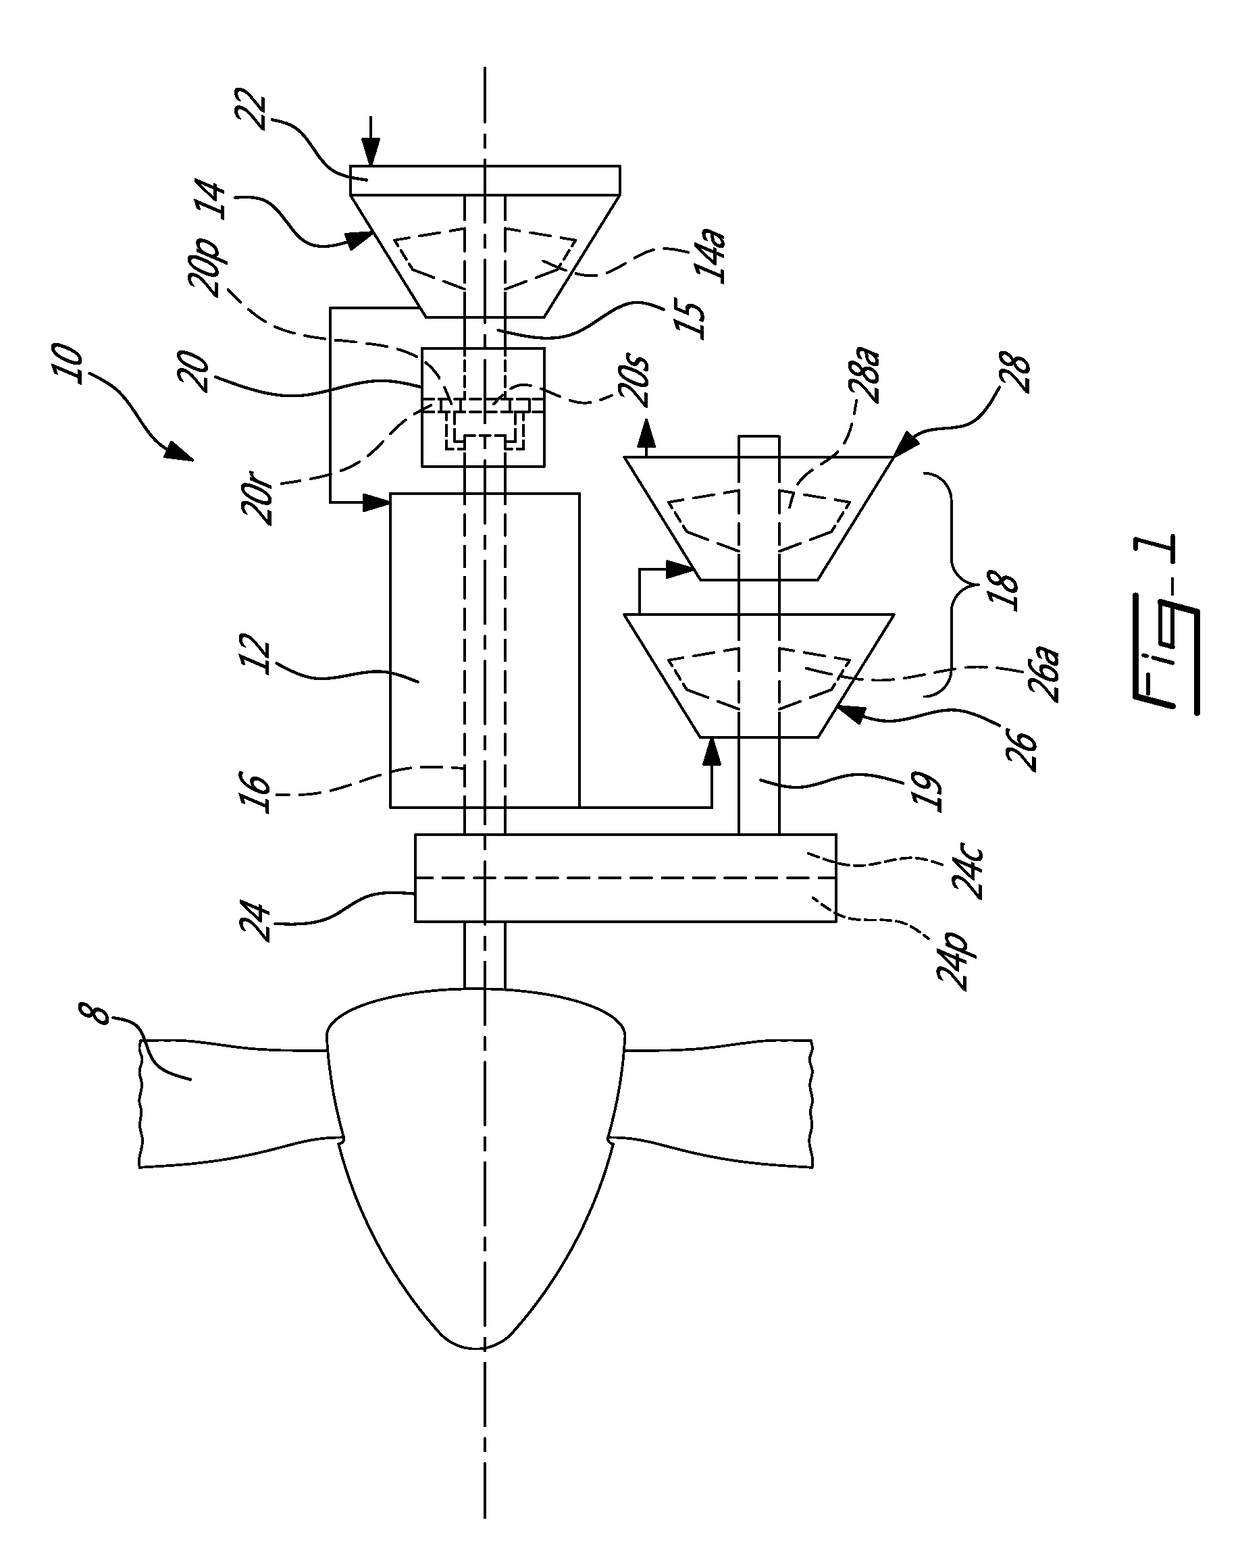 Compound engine assembly with modulated flow